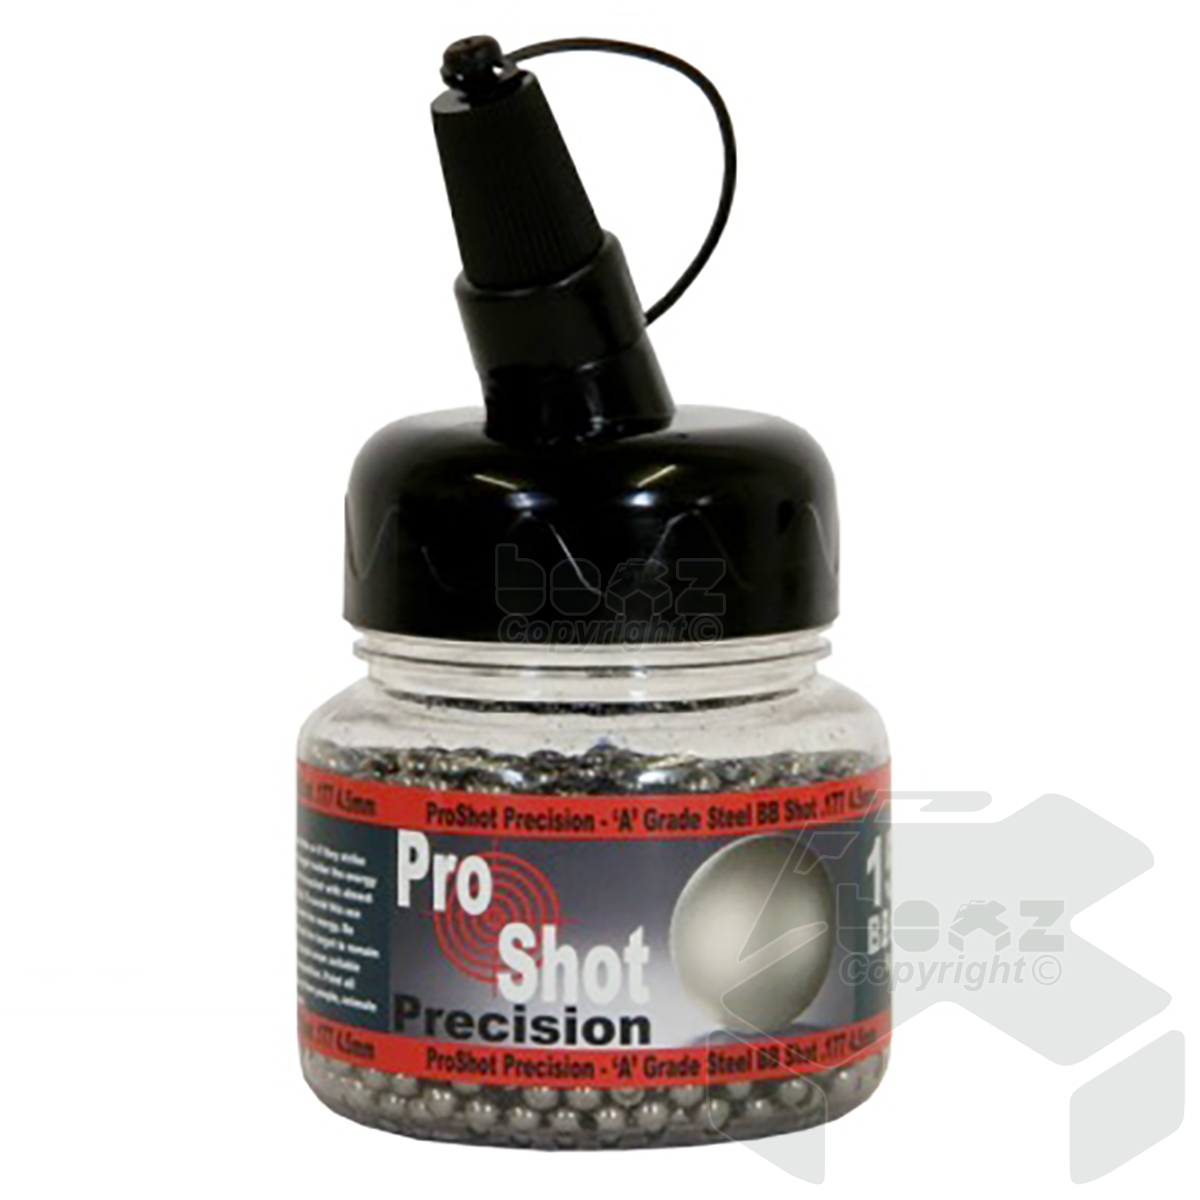 Proshot Precision 'A' Grade Steel BB's Pack of 1,500 - 4.50mm .177 Cal